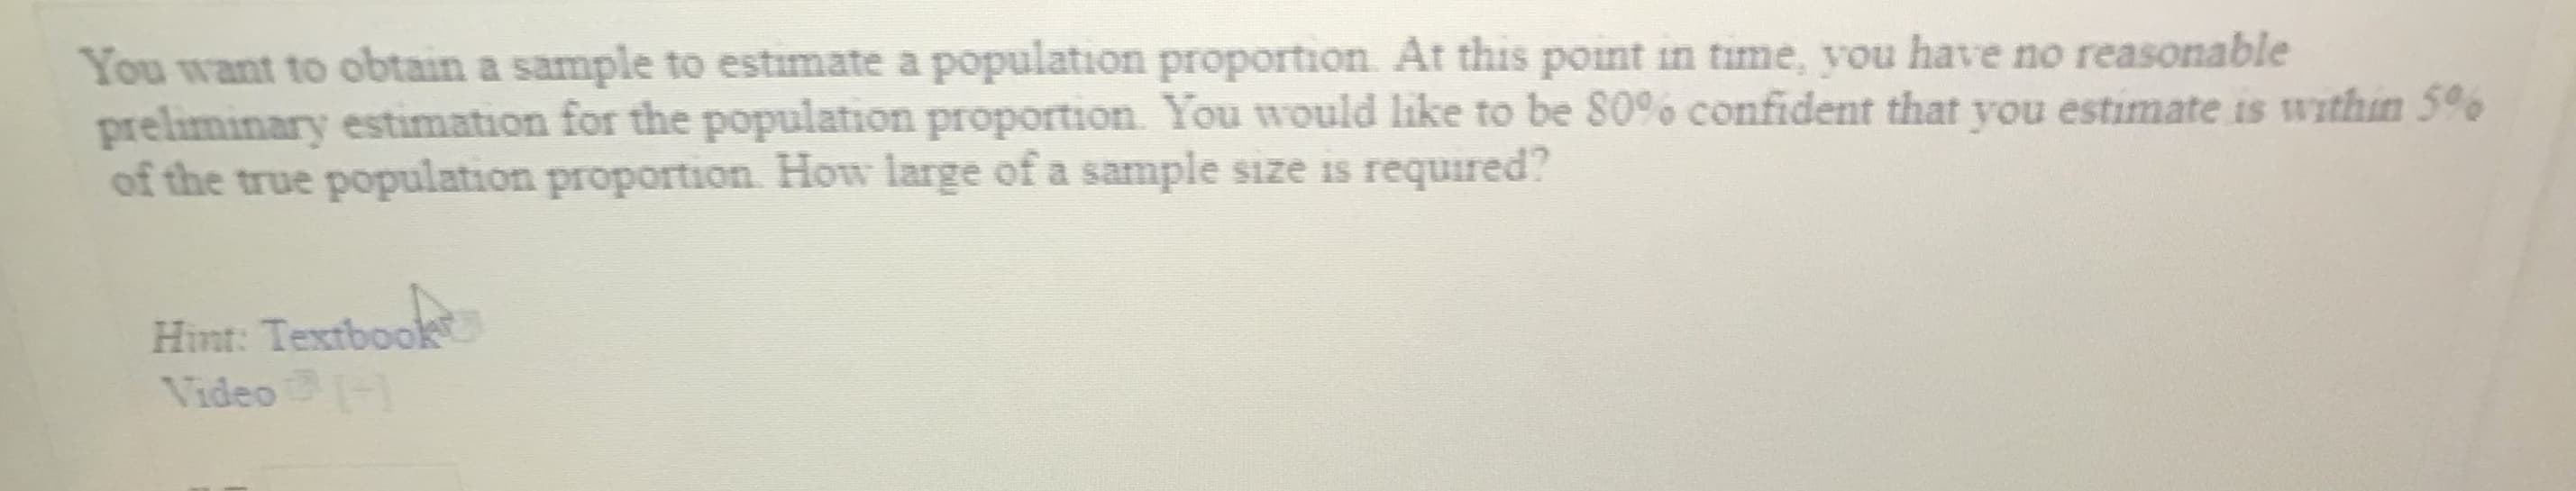 You want to obtain a sample to estimate a population proportion. At this point in time, you have no reasonable
preliminary estimation for the population proportion. You would like to be S0% confident that you estimate is within 5%
of the true population proportion. How large of a sample size is required?
Hint: Textboo
Video
